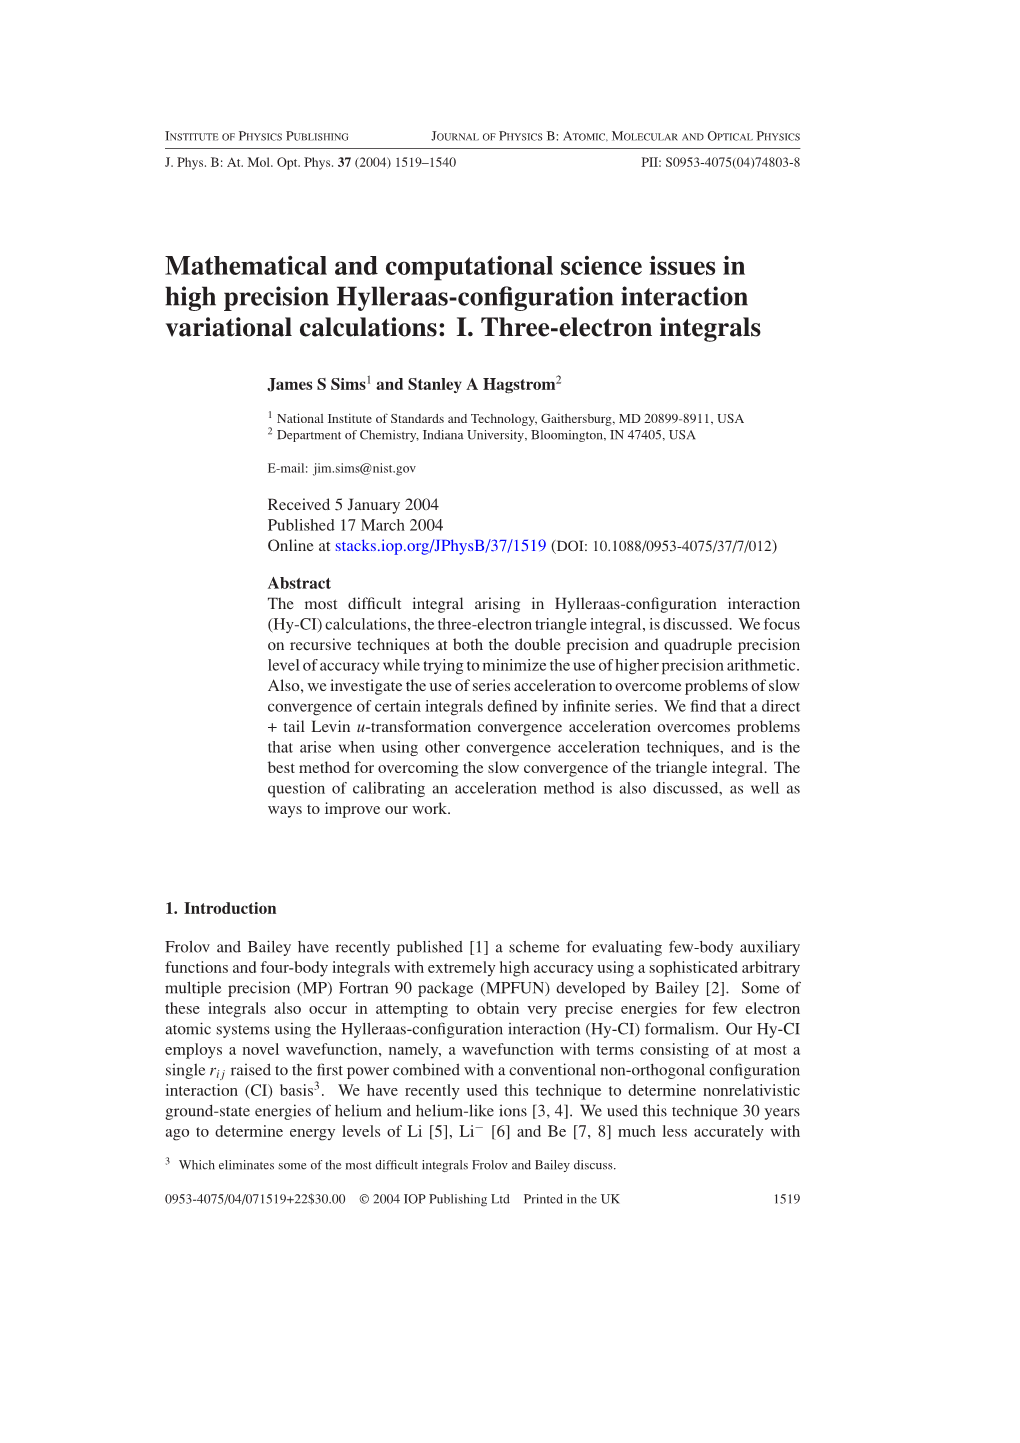 Mathematical and Computational Science Issues in High Precision Hylleraas-Conﬁguration Interaction Variational Calculations: I